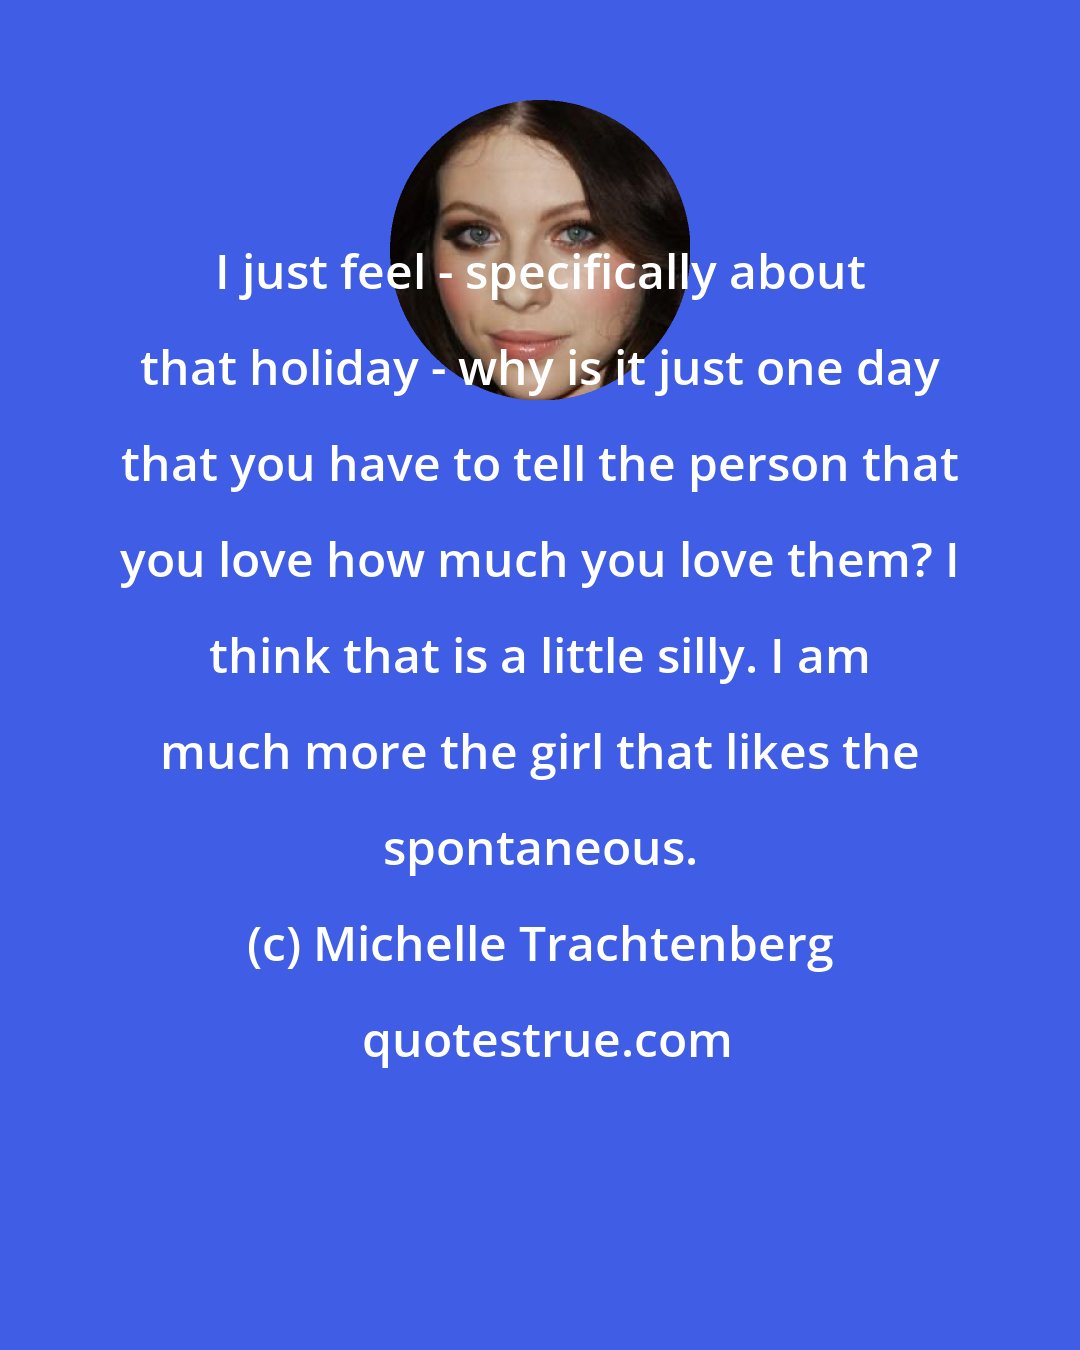 Michelle Trachtenberg: I just feel - specifically about that holiday - why is it just one day that you have to tell the person that you love how much you love them? I think that is a little silly. I am much more the girl that likes the spontaneous.